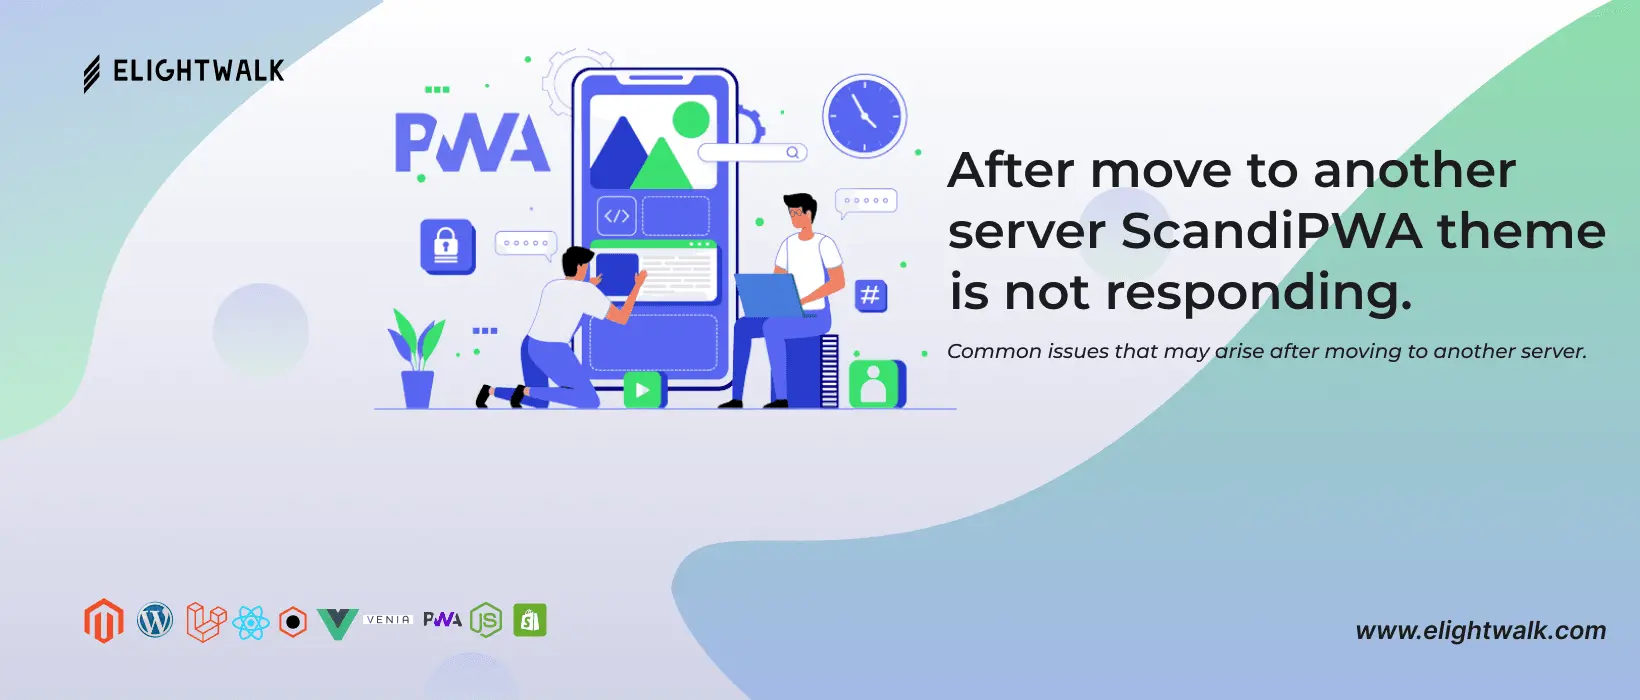 After move to another server ScandiPWA theme is not responding.